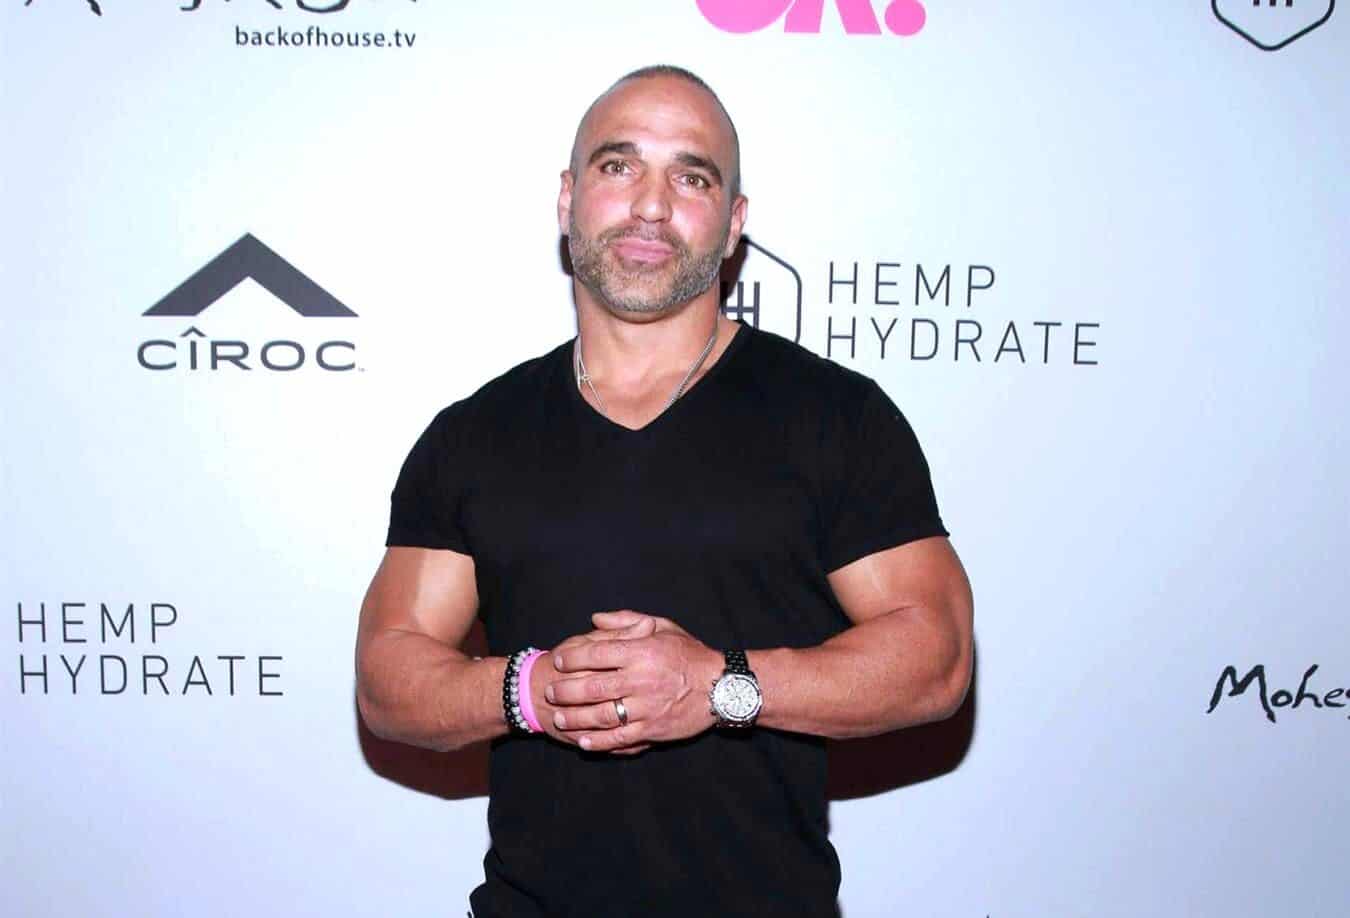 VIDEO: RHONJ's Joe Gorga Screams at Tenant Over Alleged Unpaid Rent as Tenant Promises to Call Cops, Plus How Much Tenant is Accused of Owing